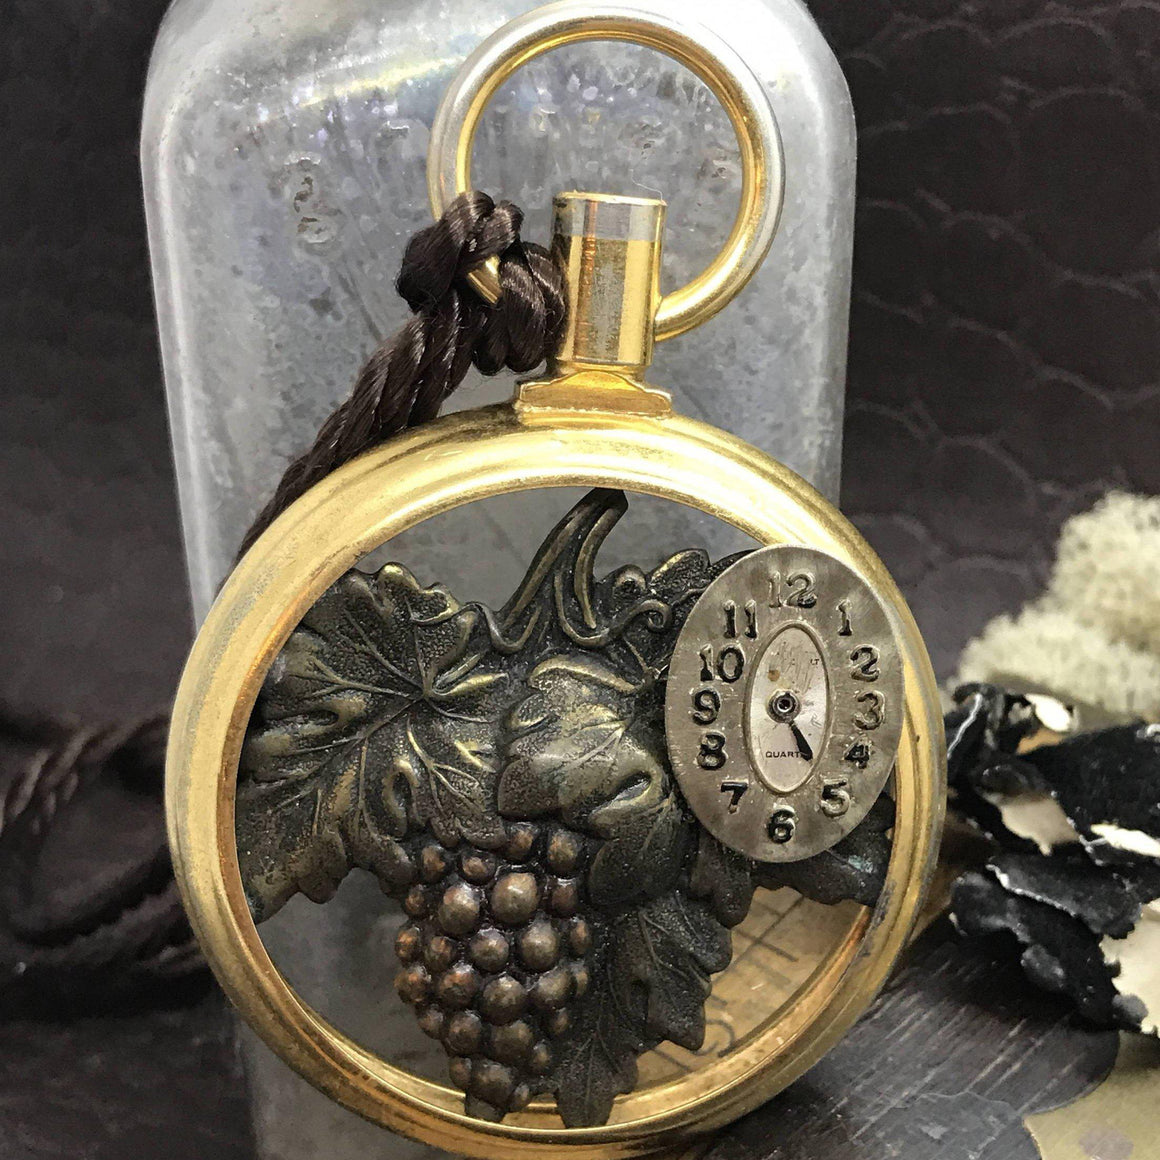 Unique Watch Necklace with Grapes - The Victorian Magpie